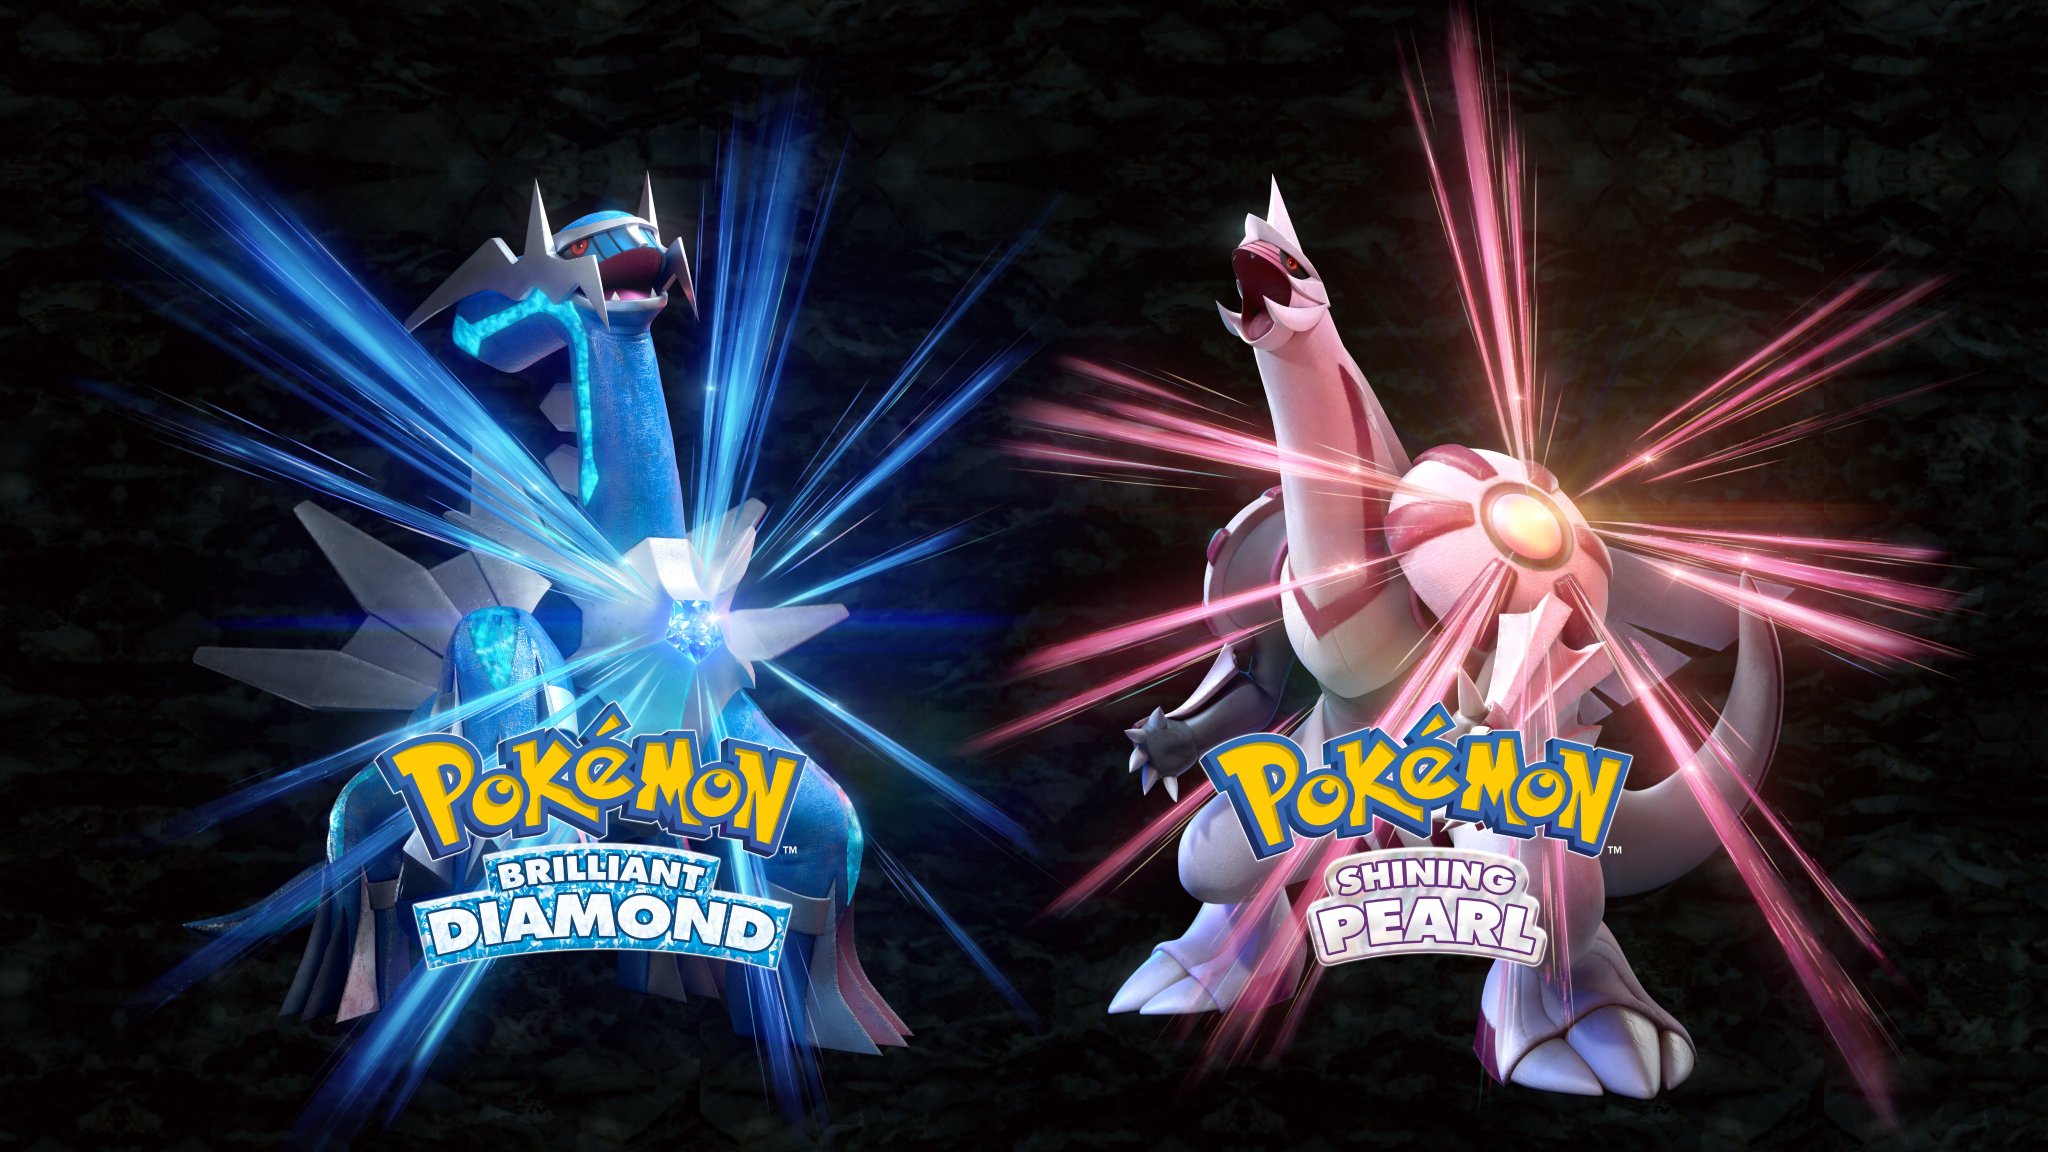 Serebii.net on X: Serebii Update: The  Generation 8  Pokédex is now updated with Pokémon Brilliant Diamond & Shining Pearl data!  Contains all information on all moves each Pokémon can use. All